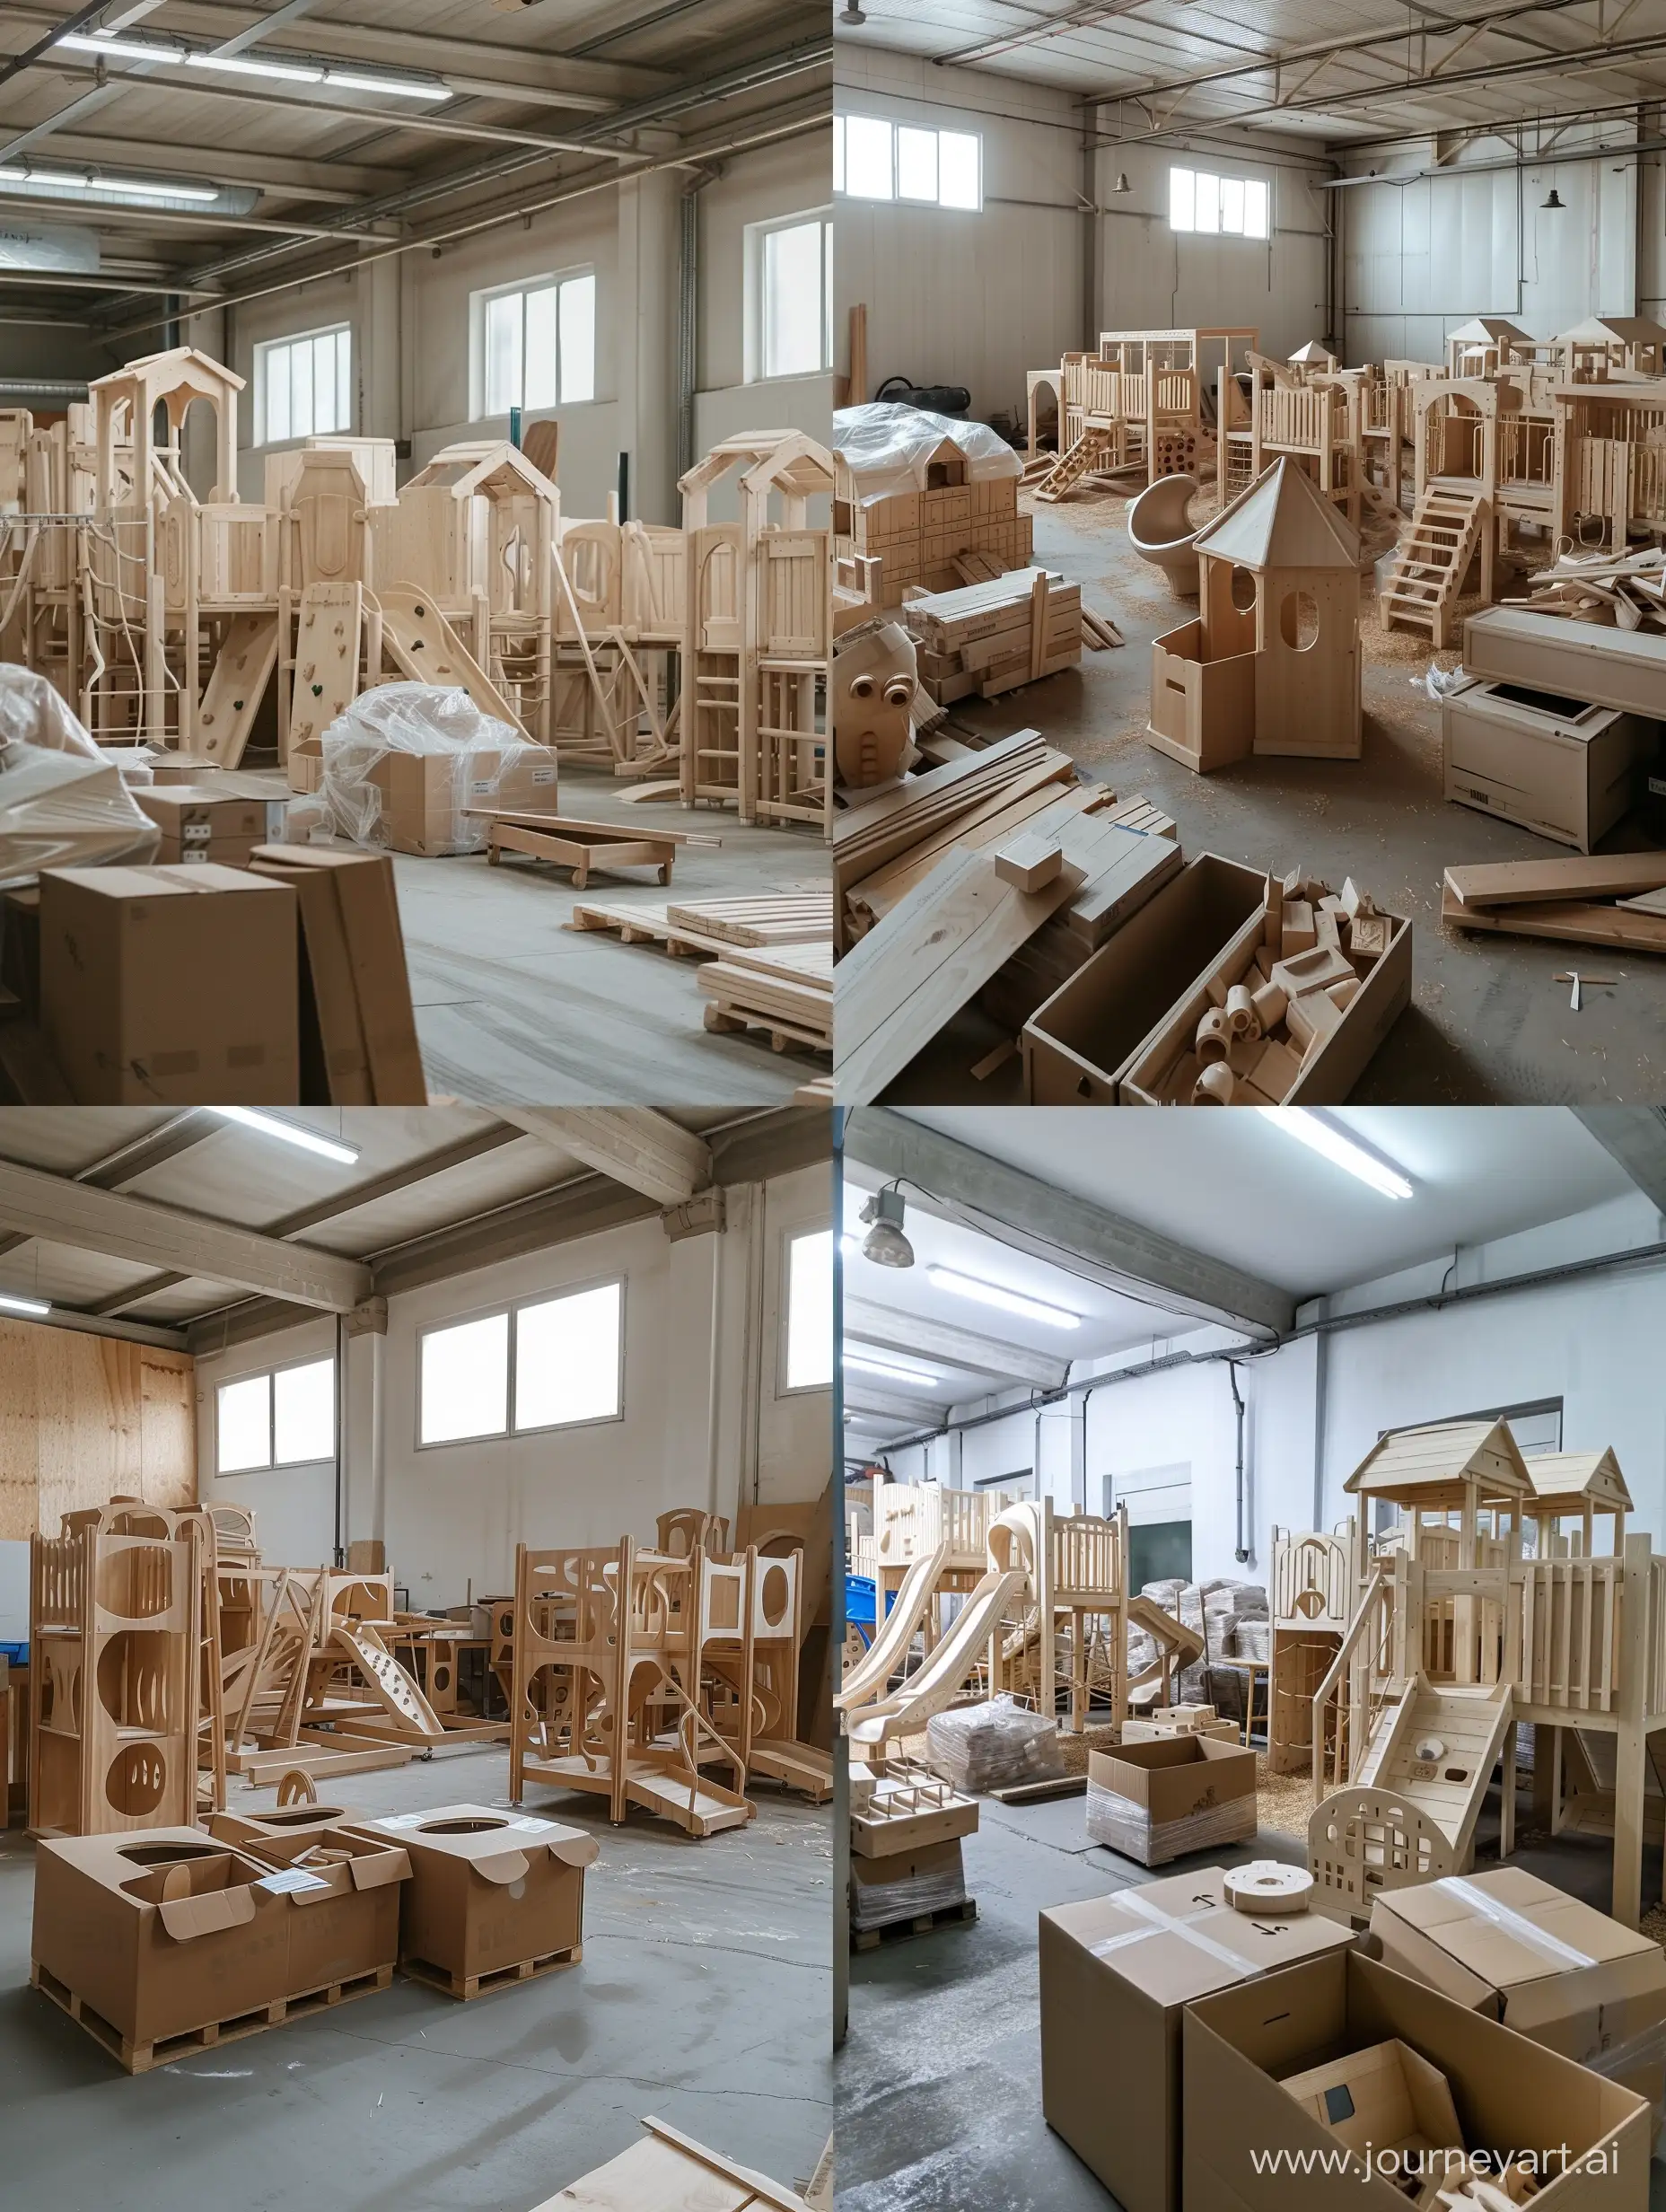 A warehouse of ready-made wooden playgrounds in disassembled form, packed in boxes and film in the workshop.
Photorealism